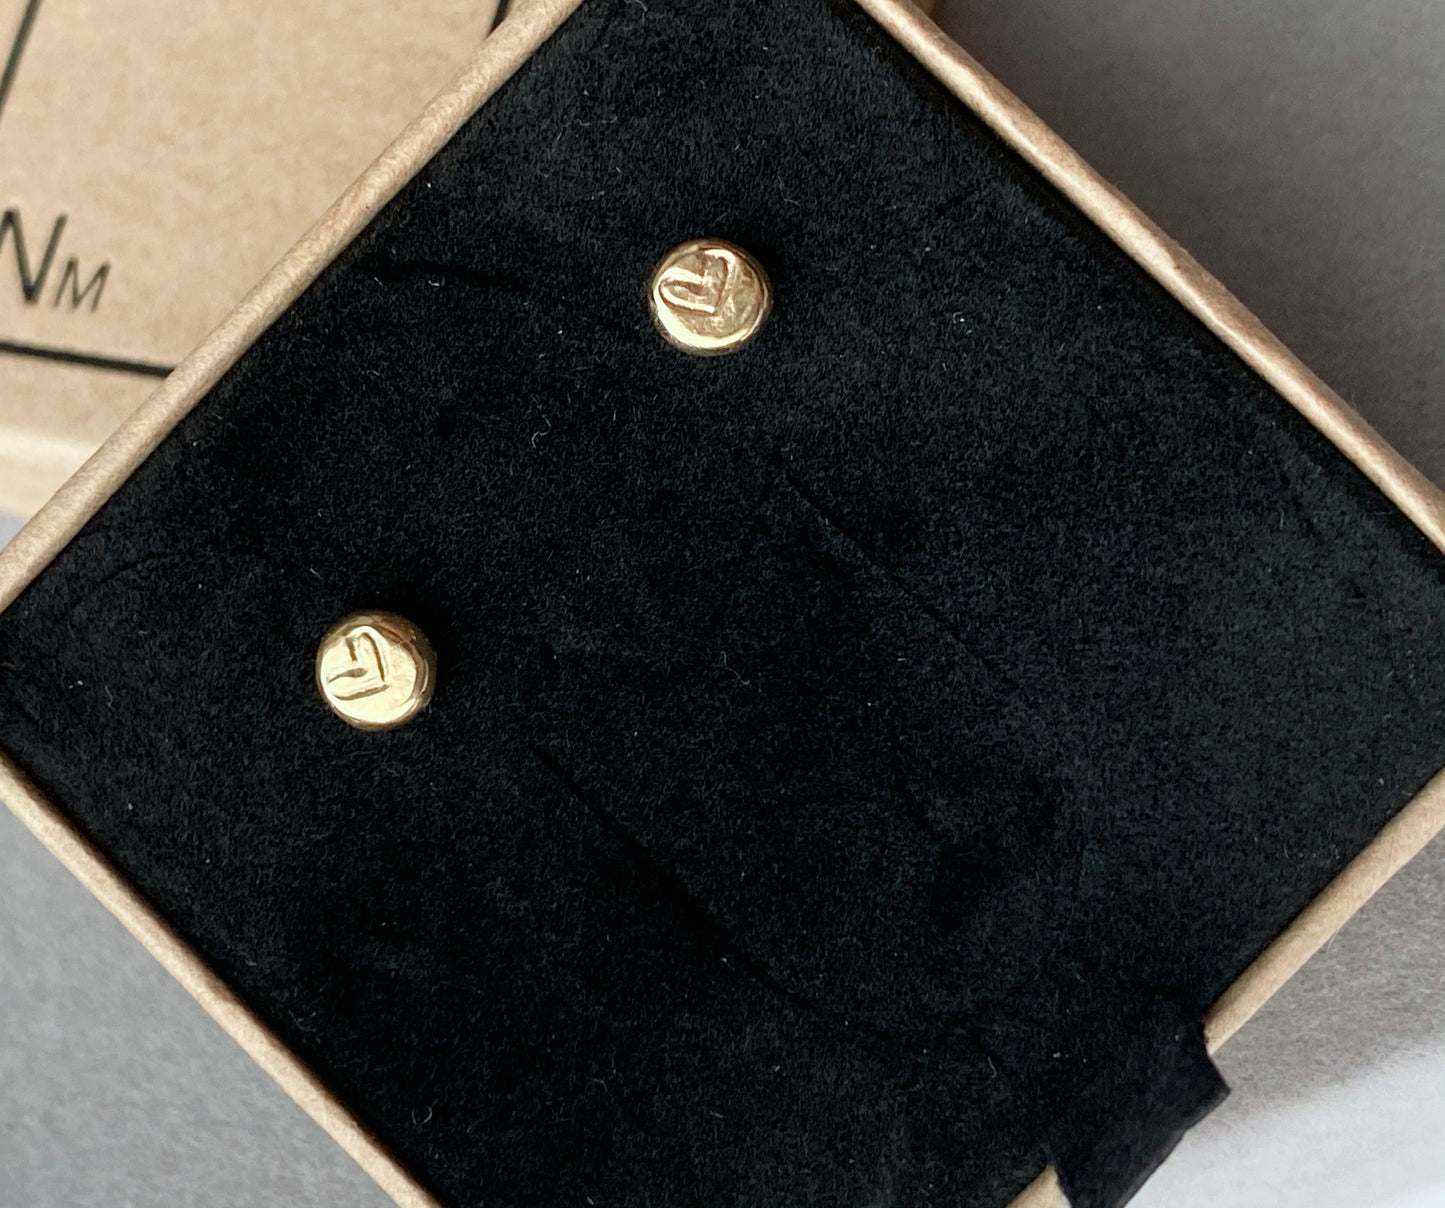 Solid 9ct yellow gold recycled heart nugget studs